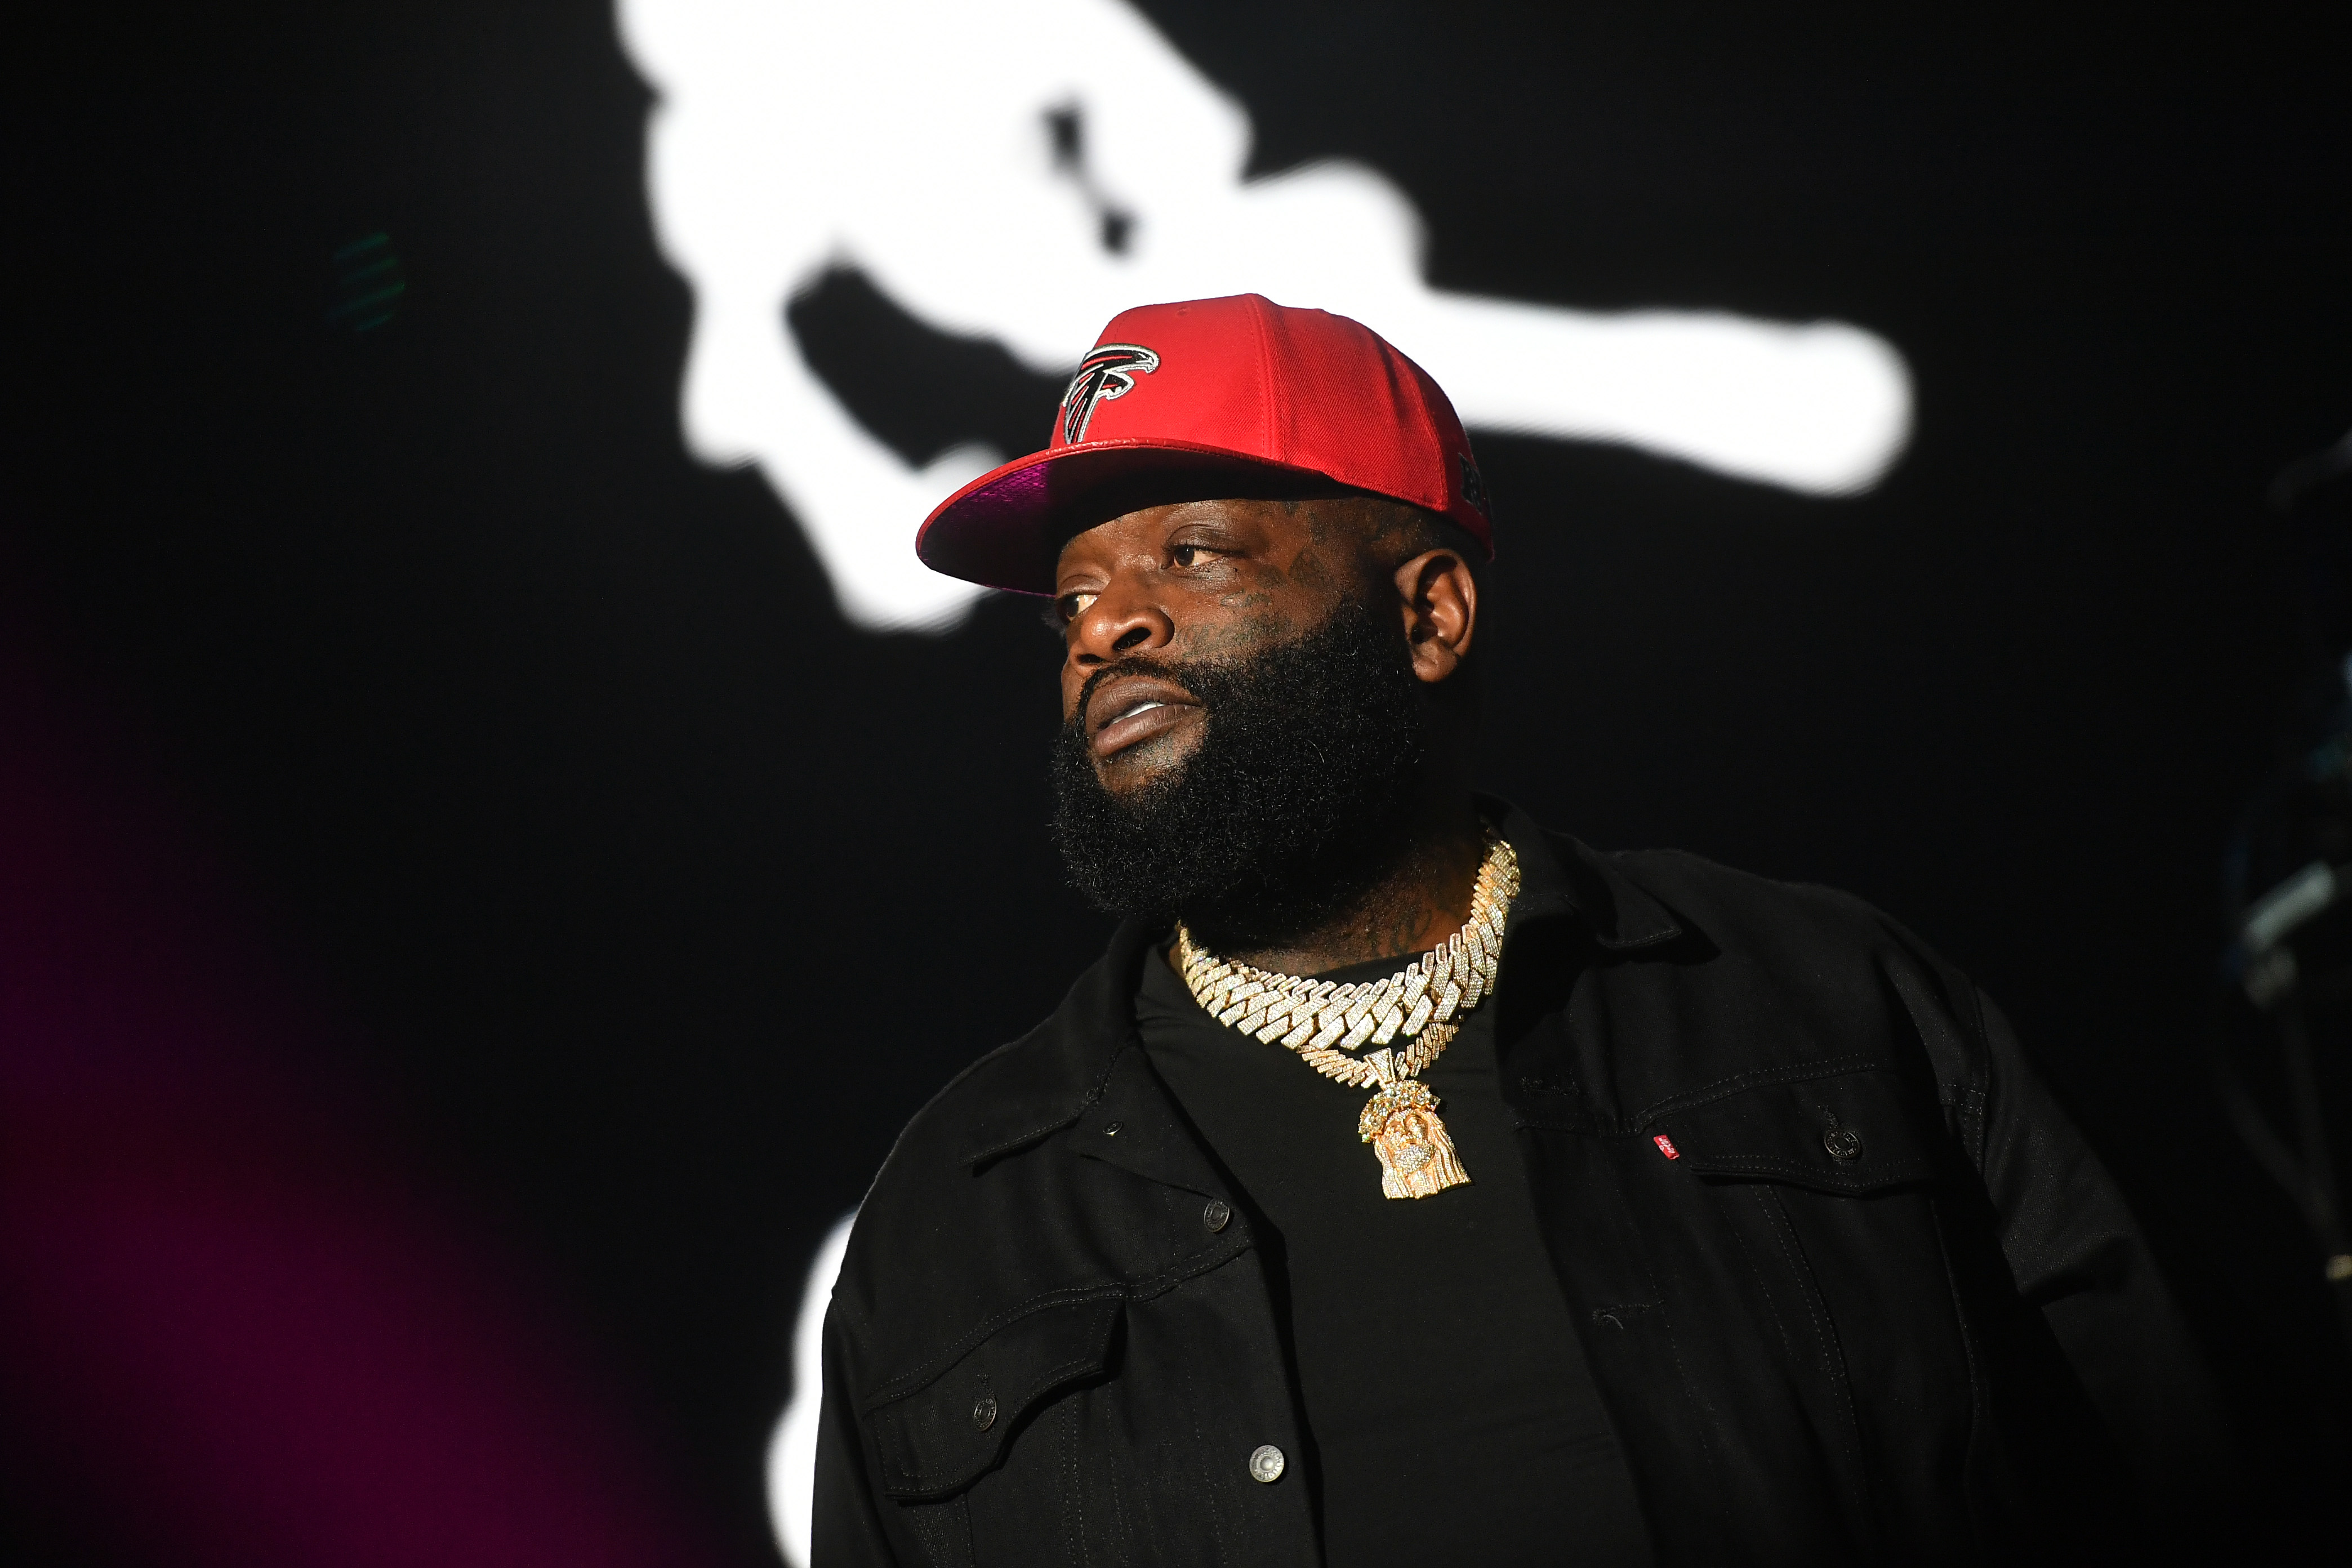 Rapper Rick Ross performs onstage during the Legendz Of The Streetz tour at State Farm Arena, on April 1, 2022, in Atlanta, Georgia. | Source: Getty Images